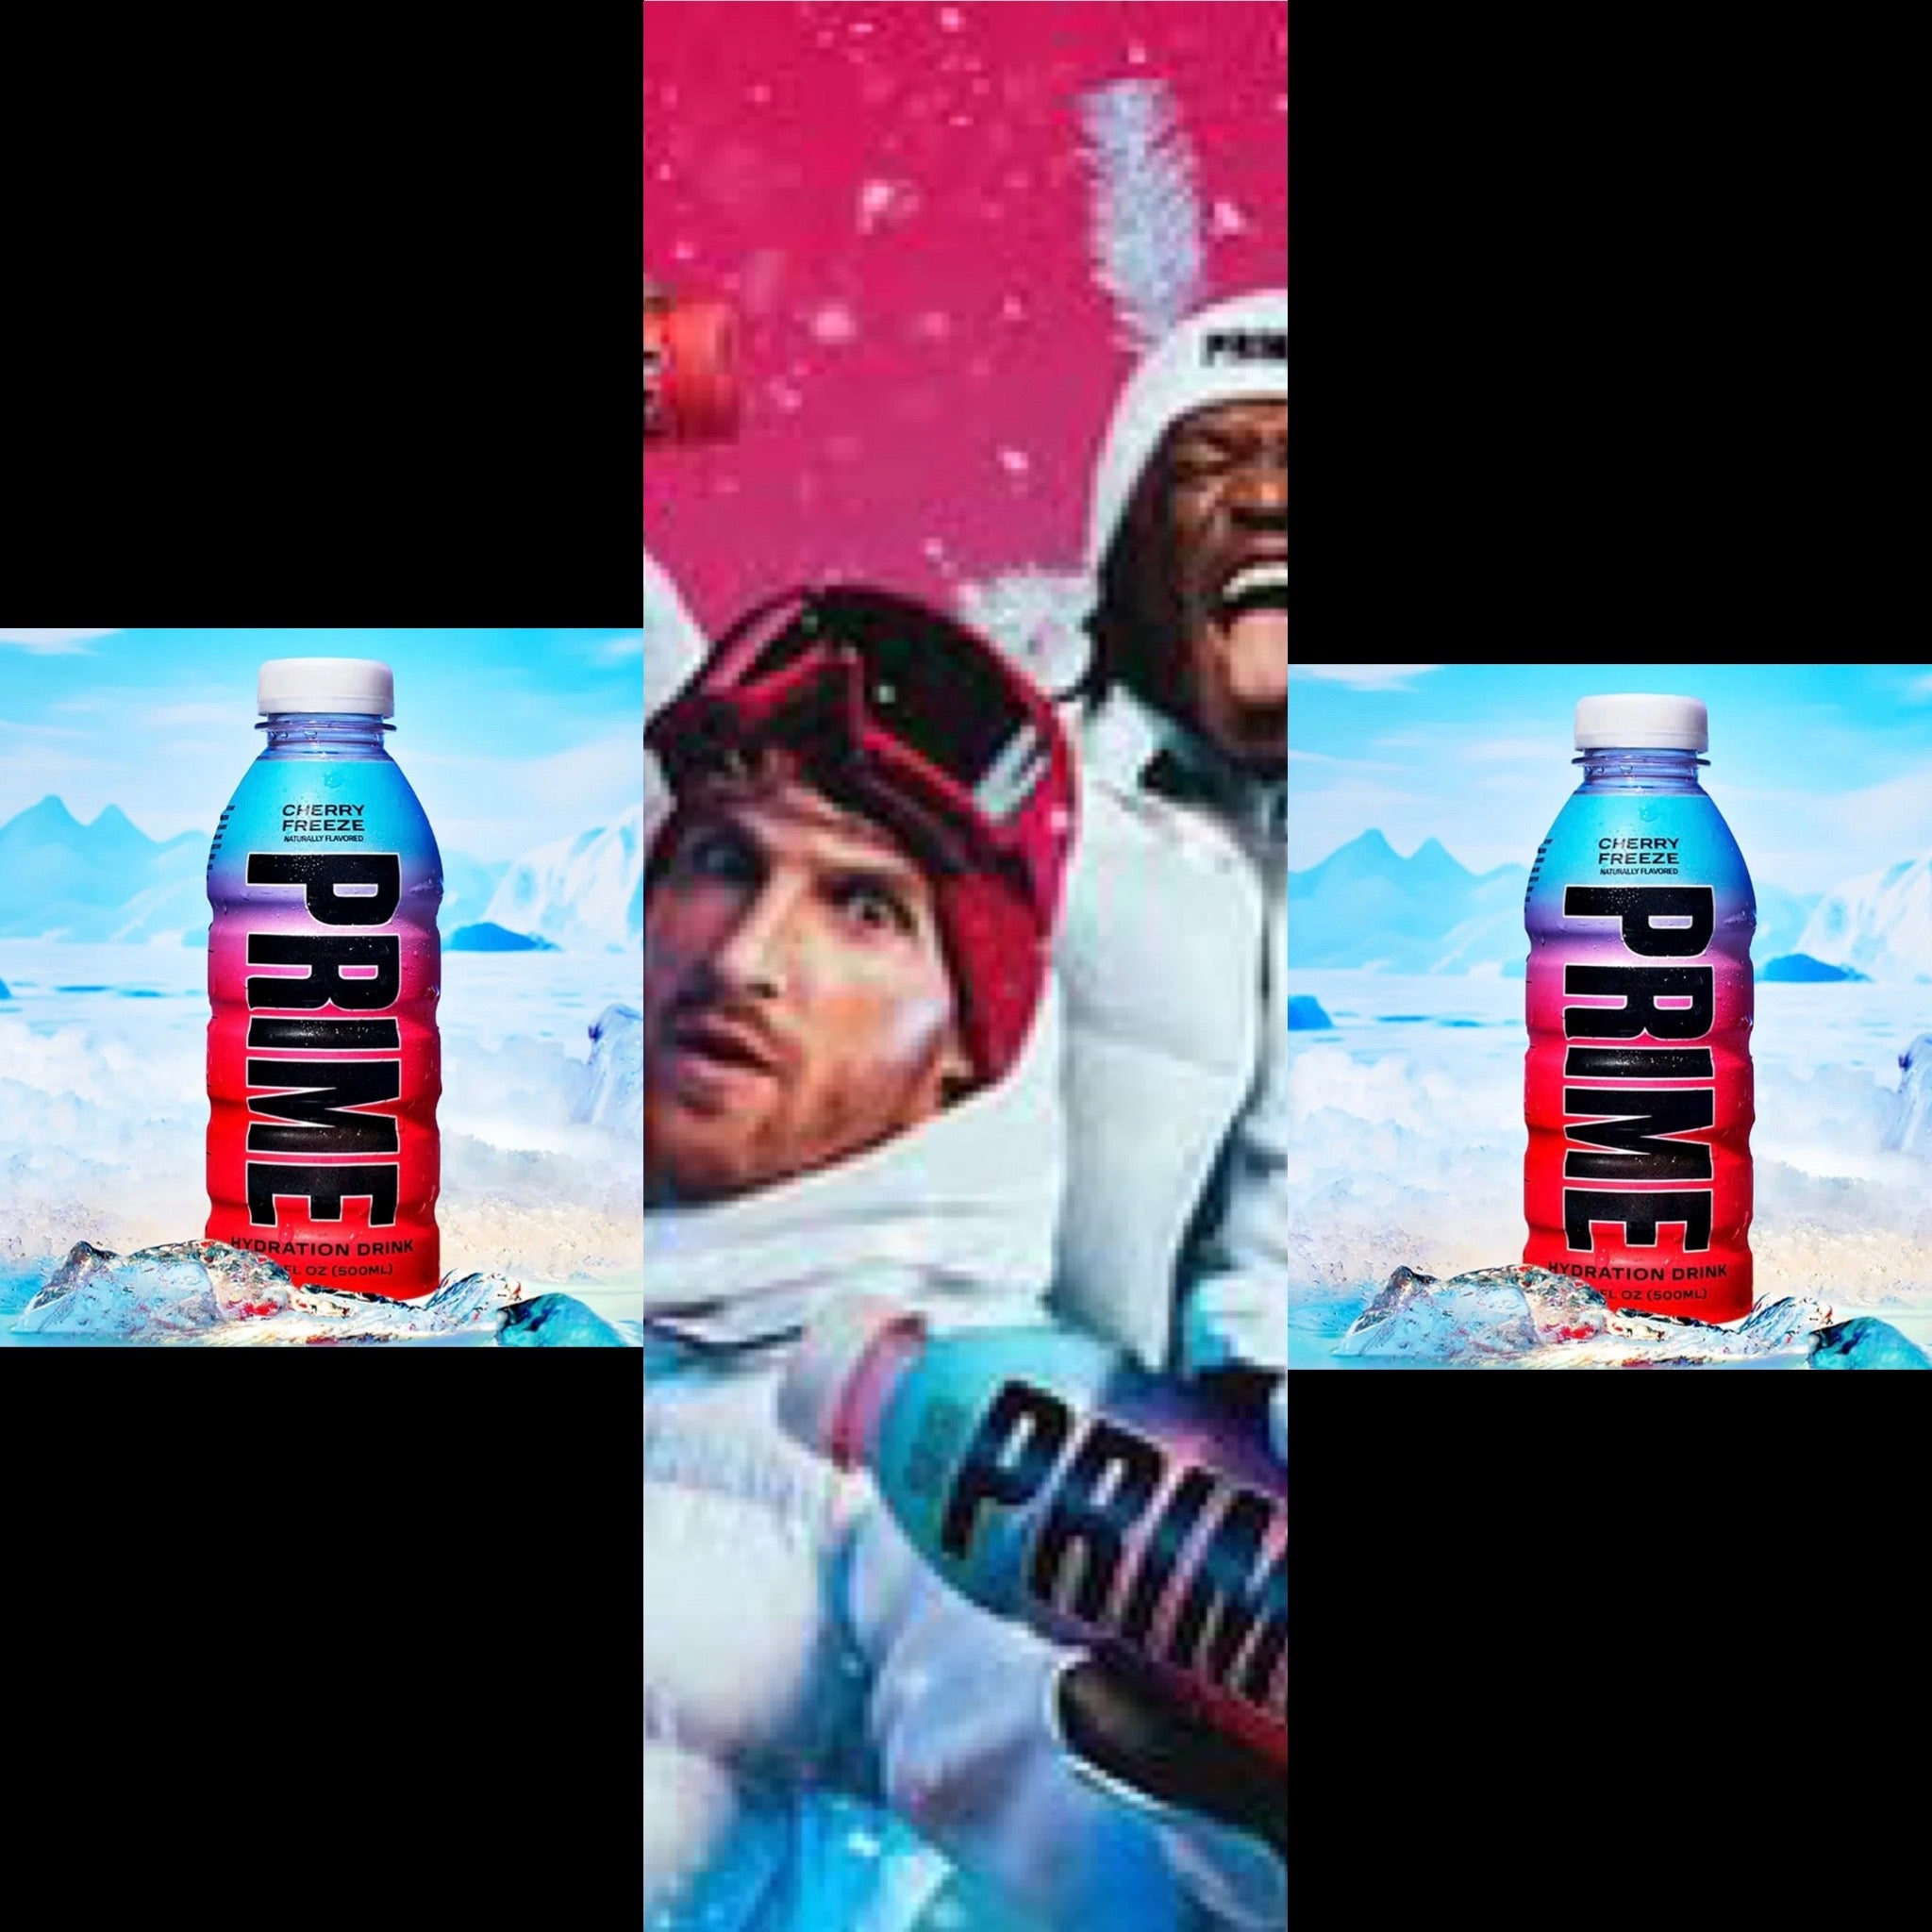 3 Pack Prime Cherry Freeze USA Edition